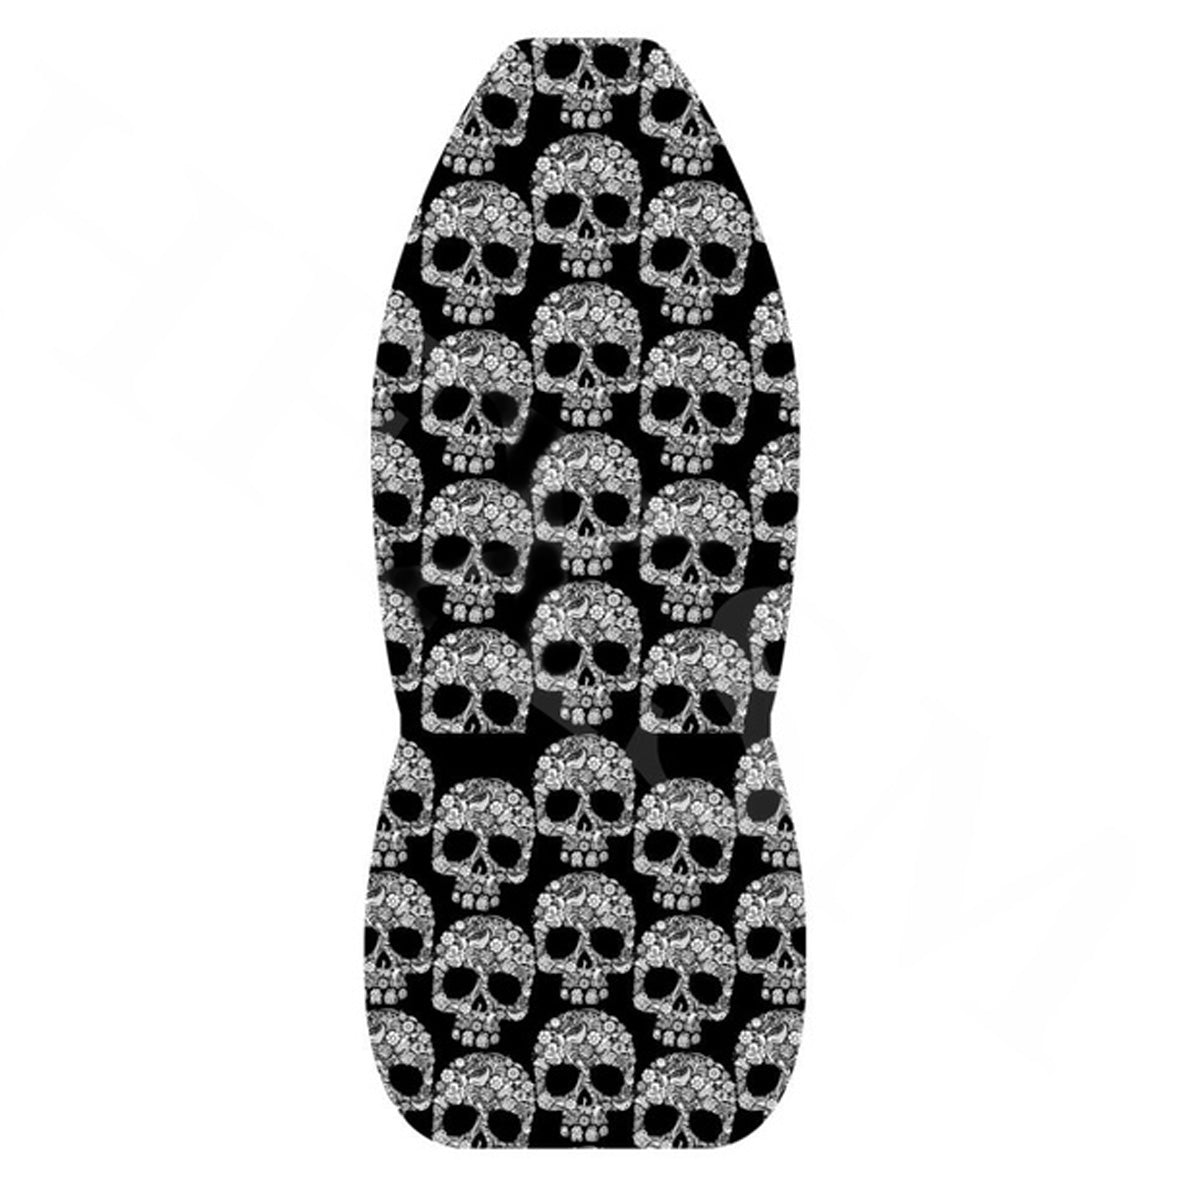 1/2Pcs Skull Print Front Car Truck Seat Cover Fabric Cases Protector Breathable - Auto GoShop